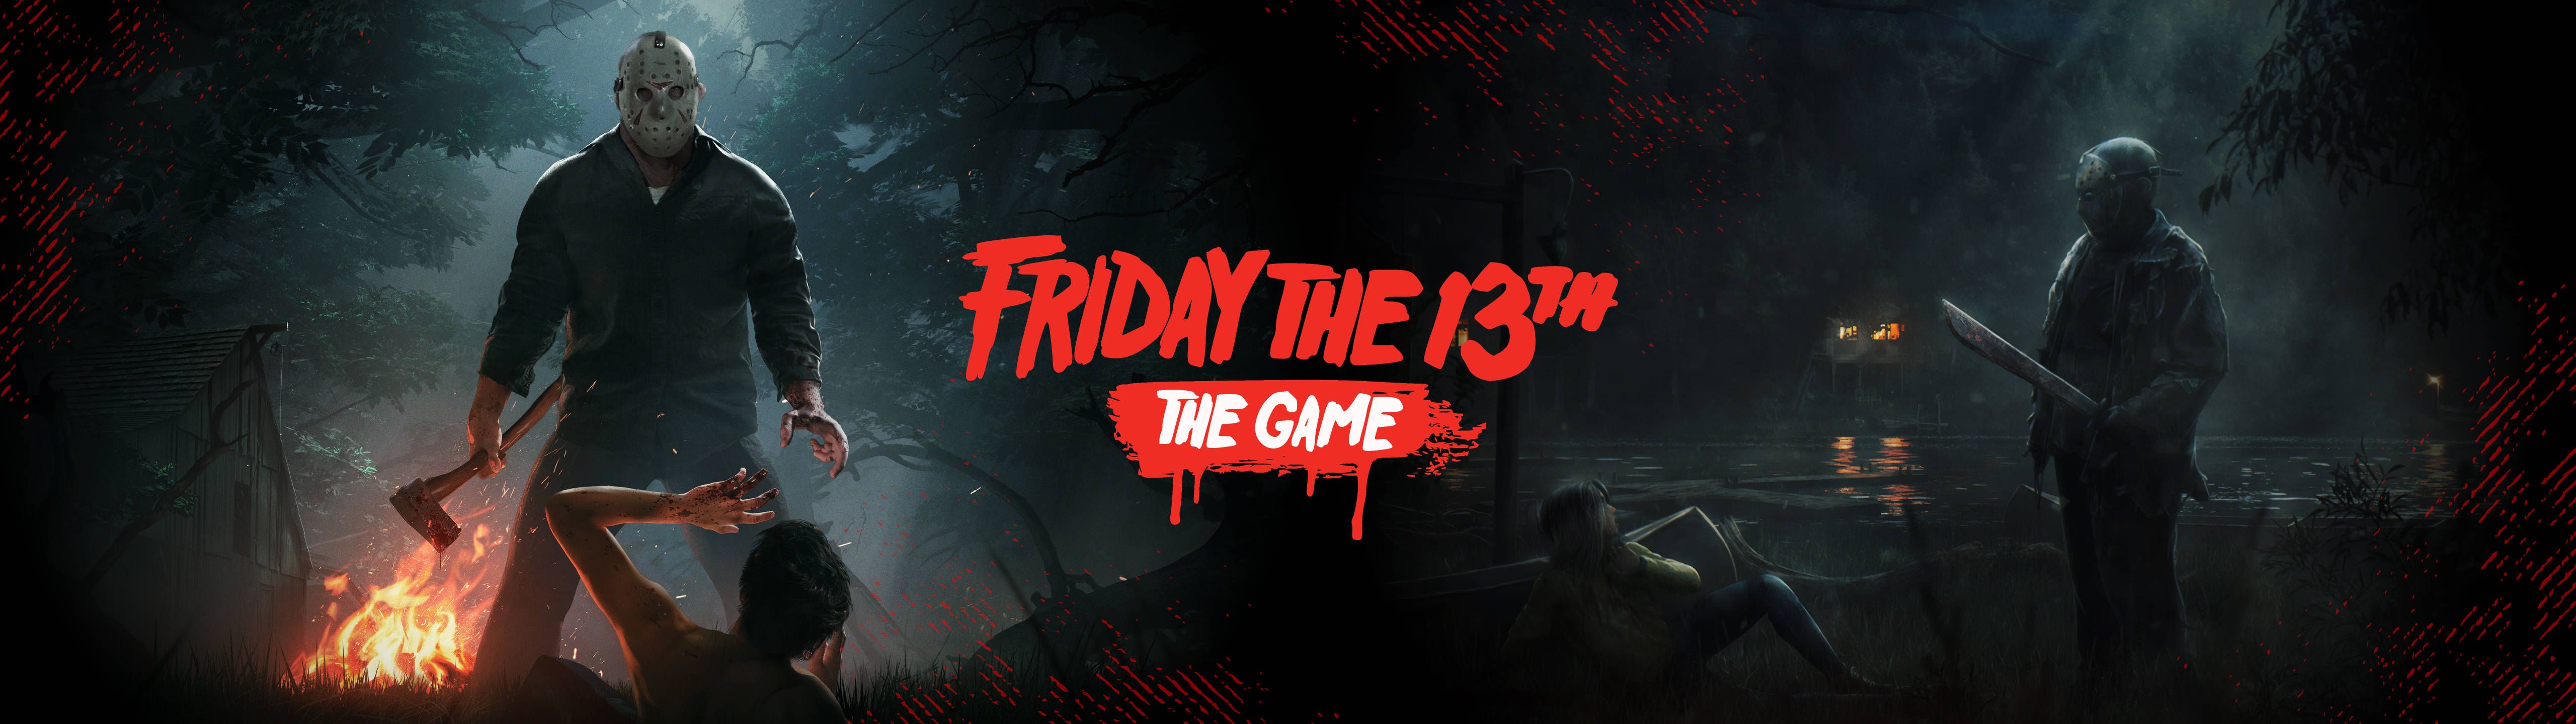 Download Friday The 13th 5120x1440 Gaming Wallpaper